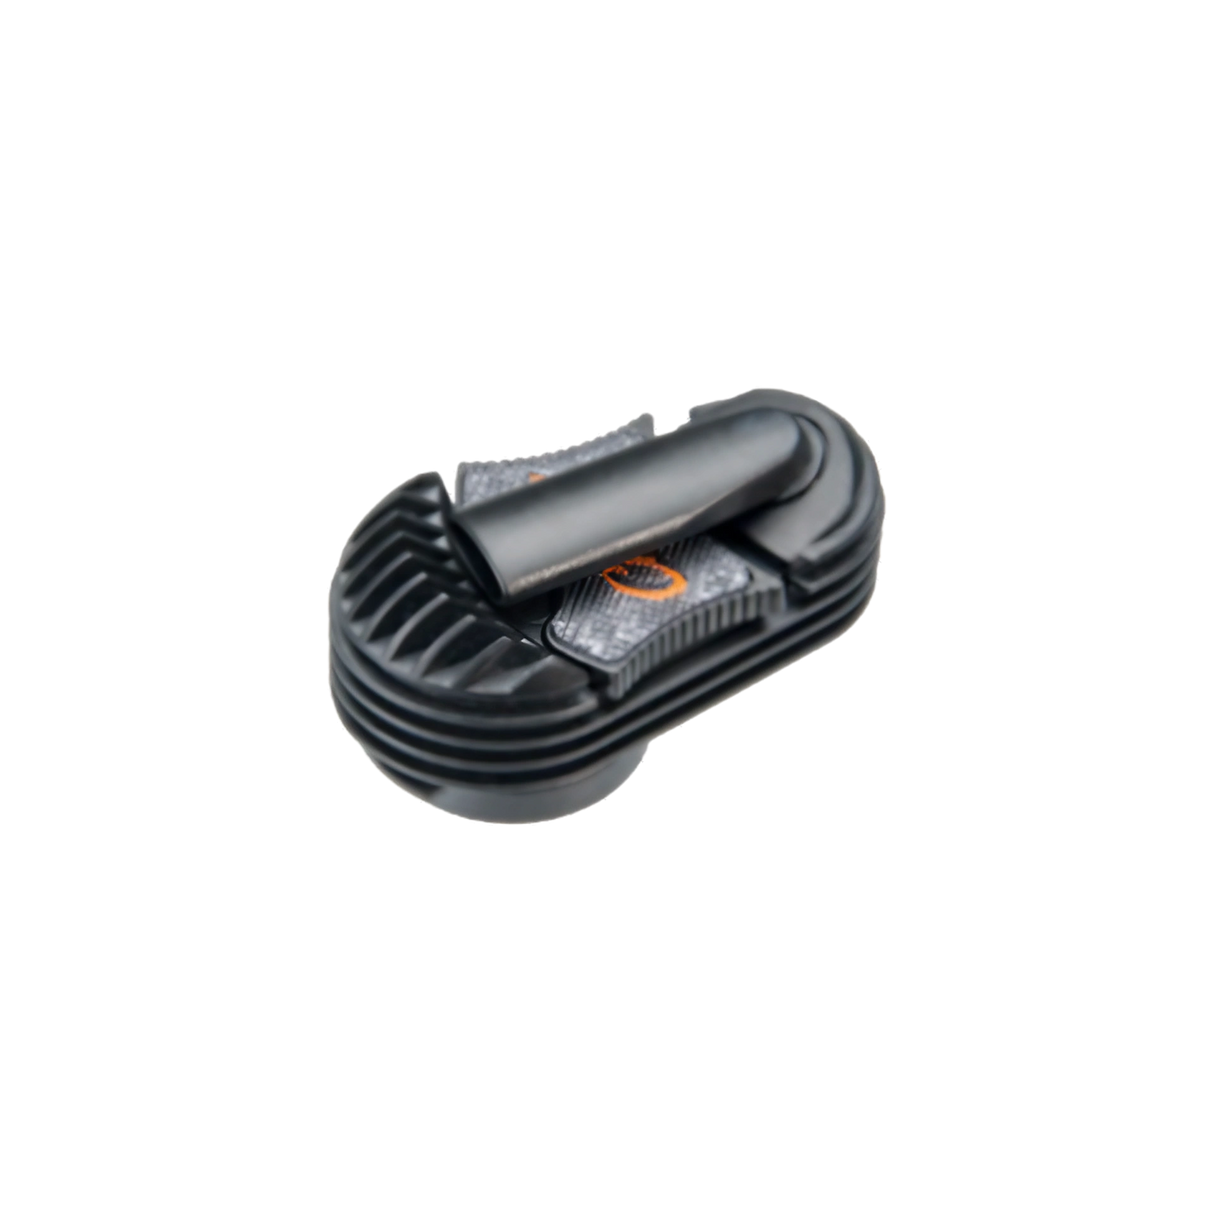 Storz & Bickel Crafty Cooling Unit for Vaporizers, top view on seamless black background